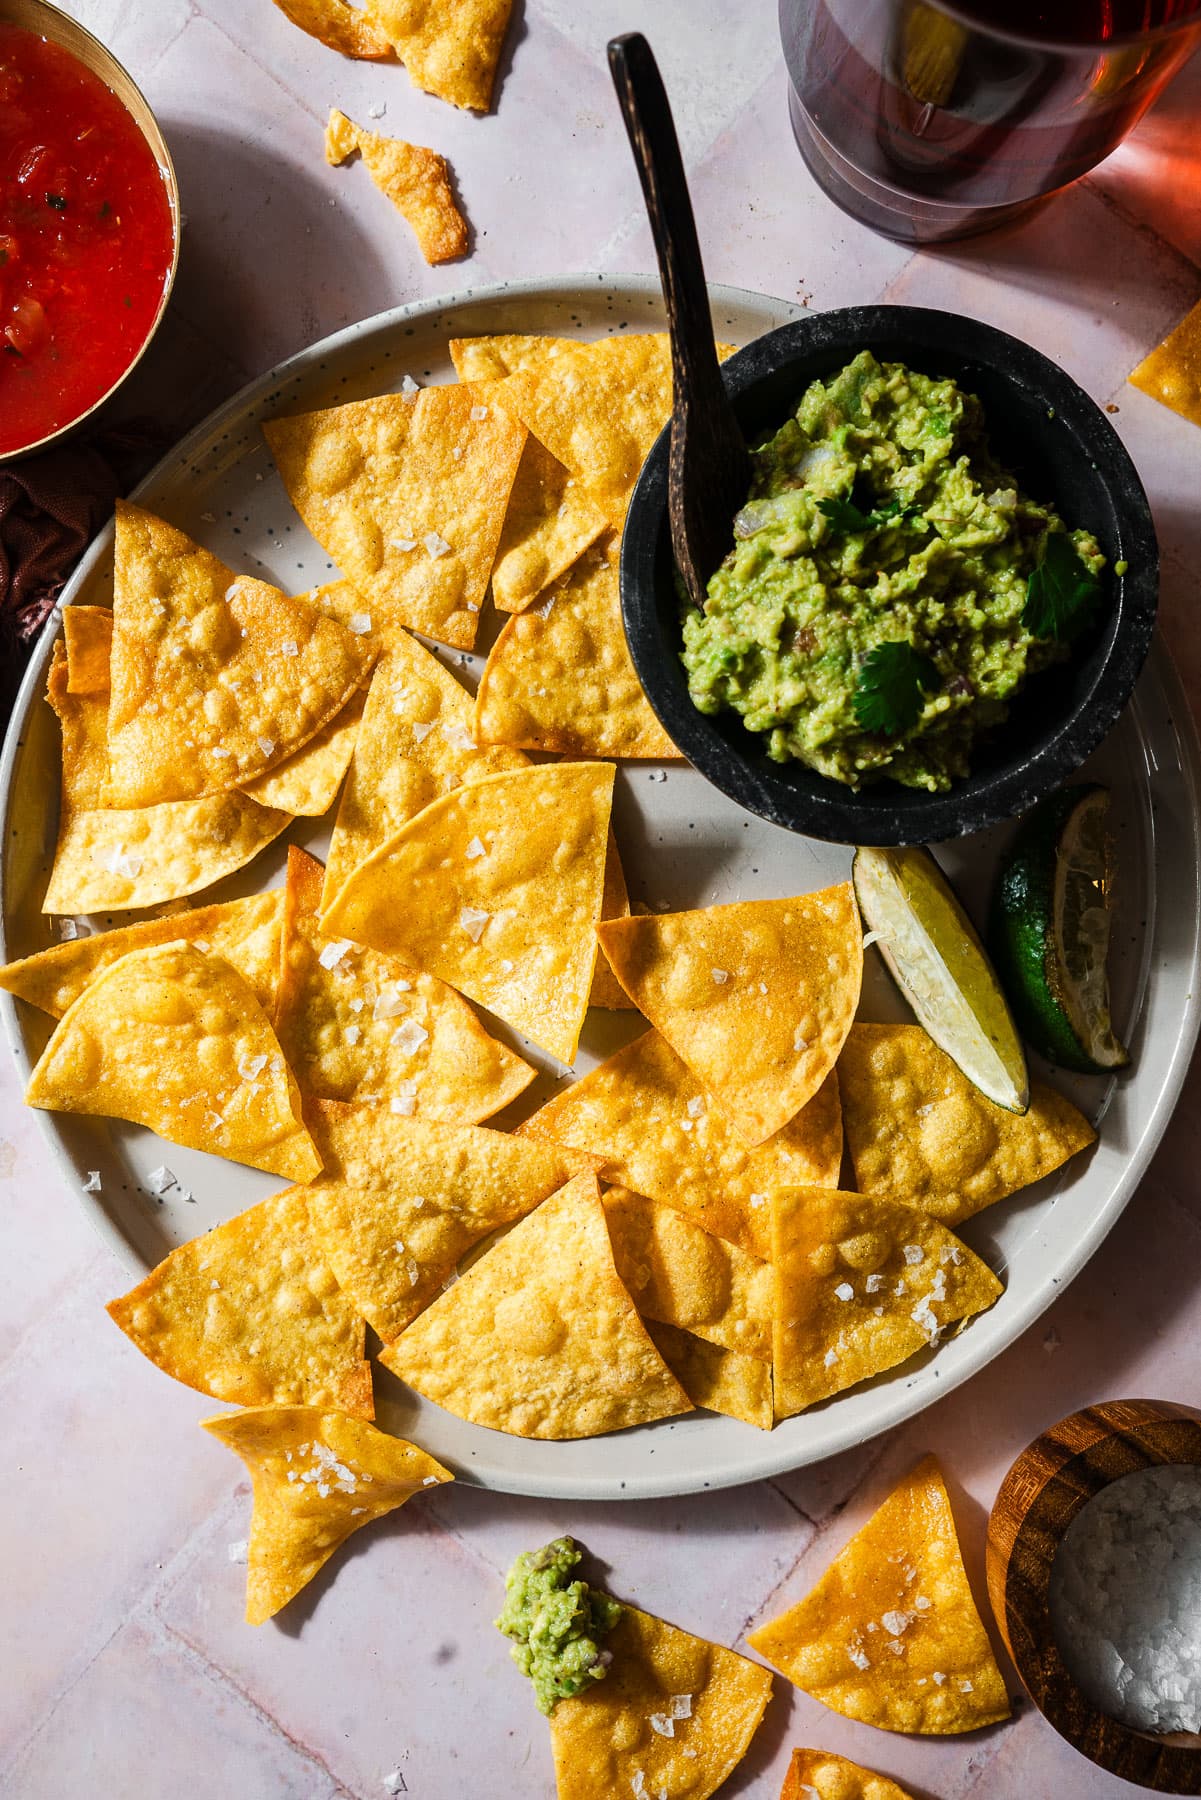 Tortilla chips in a plate with fresh limes, guacamole, and salsa.